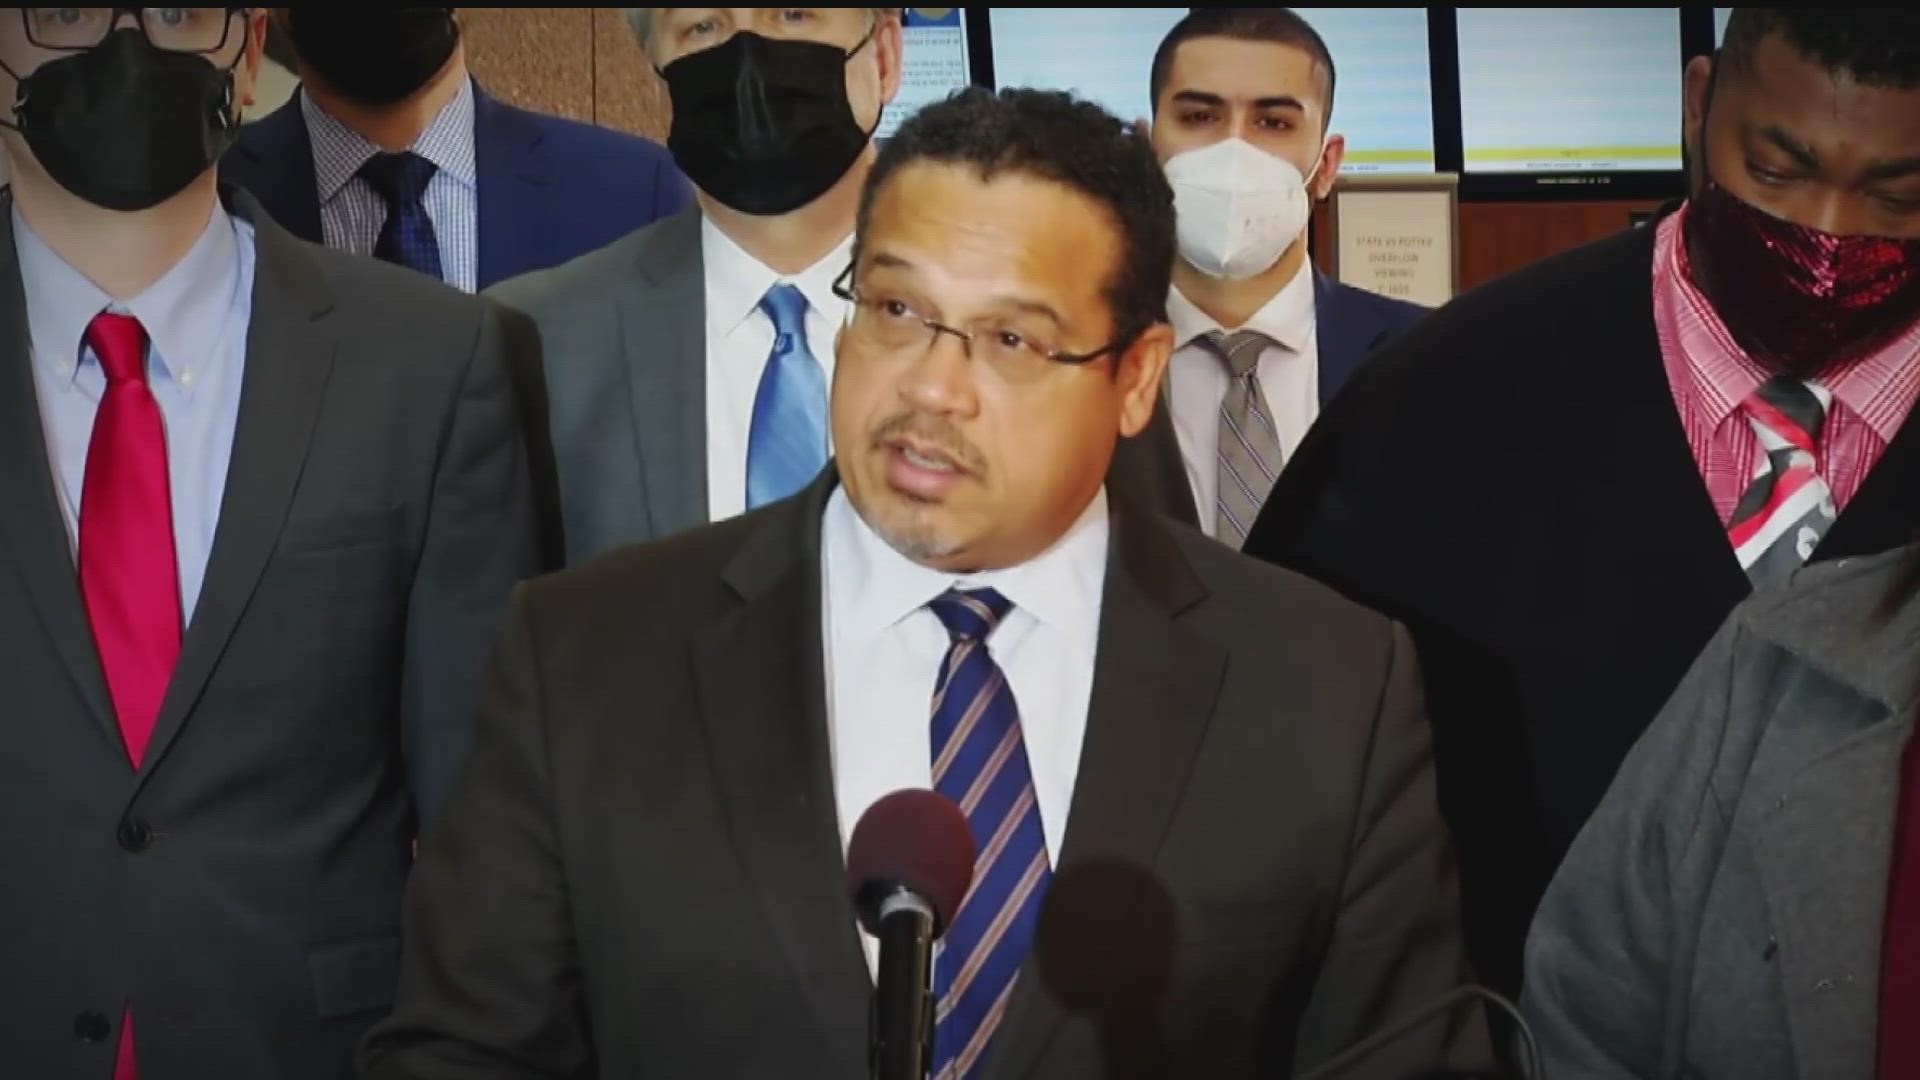 Four years after Hardel Sherrell was found lying in his own filth on a jail cell floor, Attorney General Keith Ellison will consider criminal charges.